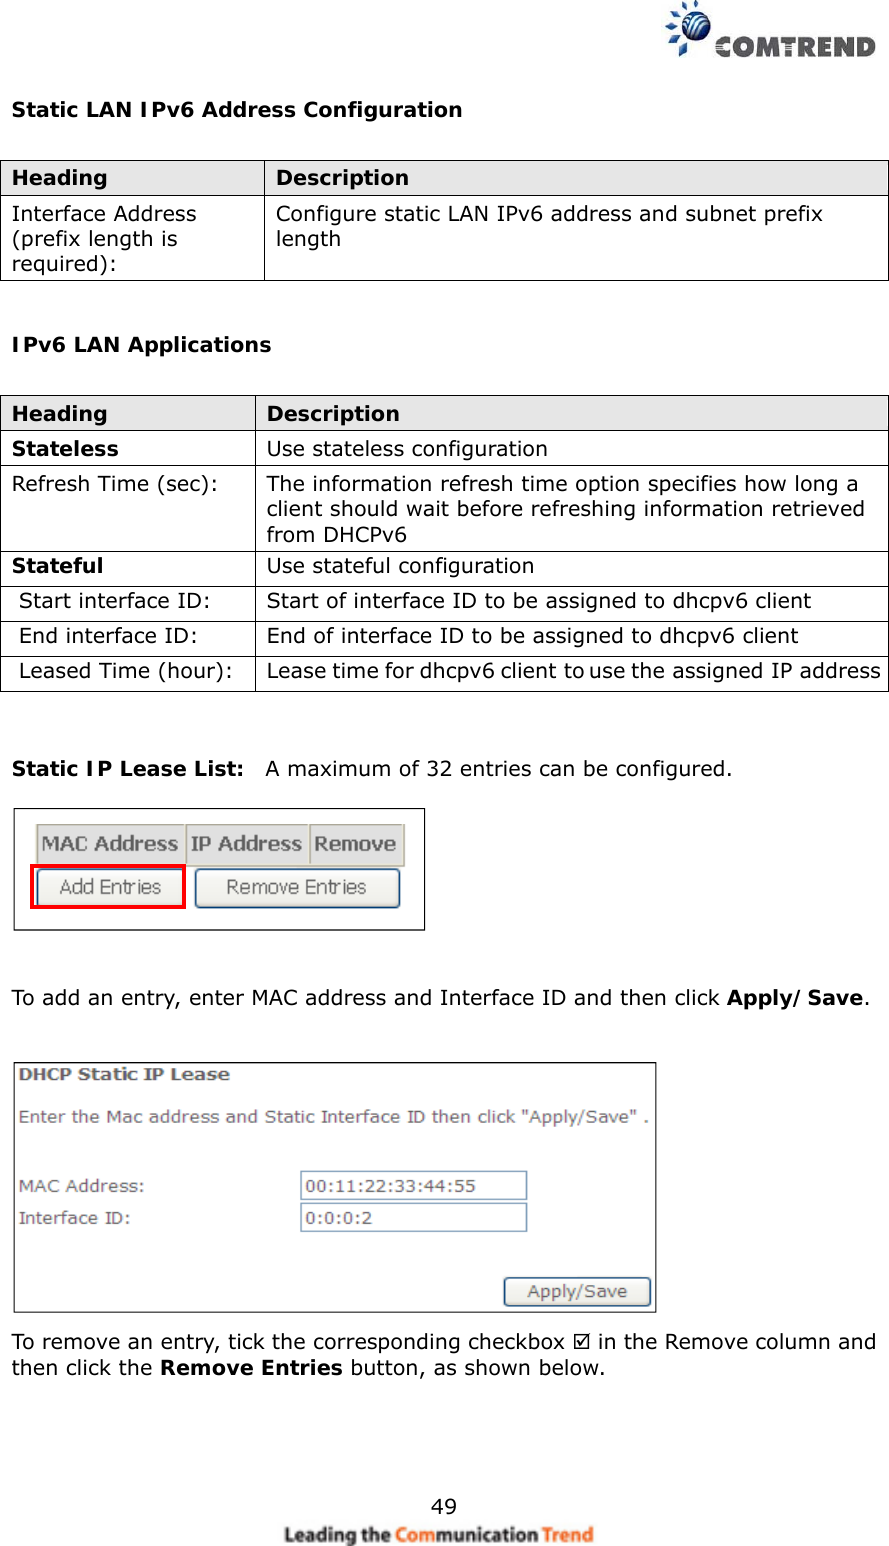    49 Static LAN IPv6 Address Configuration  Heading  Description Interface Address   (prefix length is required): Configure static LAN IPv6 address and subnet prefix length  IPv6 LAN Applications  Heading  Description Stateless  Use stateless configuration Refresh Time (sec):  The information refresh time option specifies how long a client should wait before refreshing information retrieved from DHCPv6 Stateful  Use stateful configuration  Start interface ID:  Start of interface ID to be assigned to dhcpv6 client  End interface ID:  End of interface ID to be assigned to dhcpv6 client  Leased Time (hour):  Lease time for dhcpv6 client to use the assigned IP address   Static IP Lease List:  A maximum of 32 entries can be configured.    To add an entry, enter MAC address and Interface ID and then click Apply/Save.   To remove an entry, tick the corresponding checkbox  in the Remove column and then click the Remove Entries button, as shown below. 